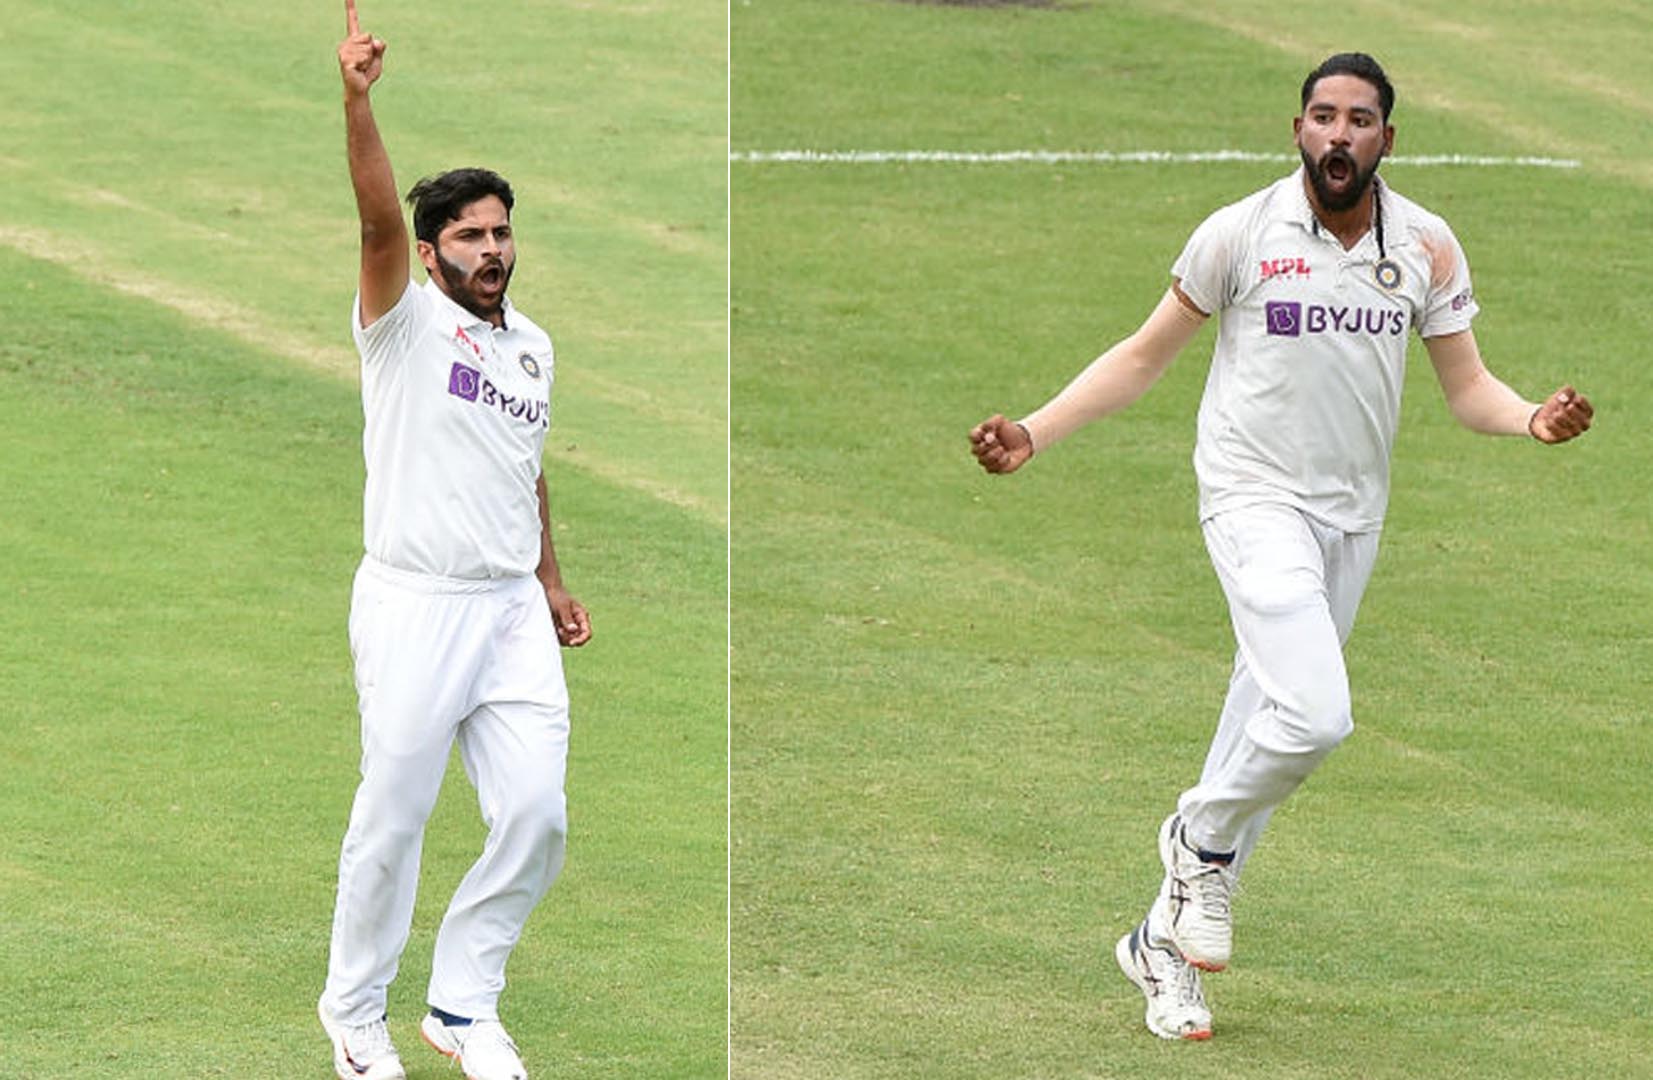 Shardul Thakur and Mohammed Siraj did well in absence of senior pacer in Australia | Getty